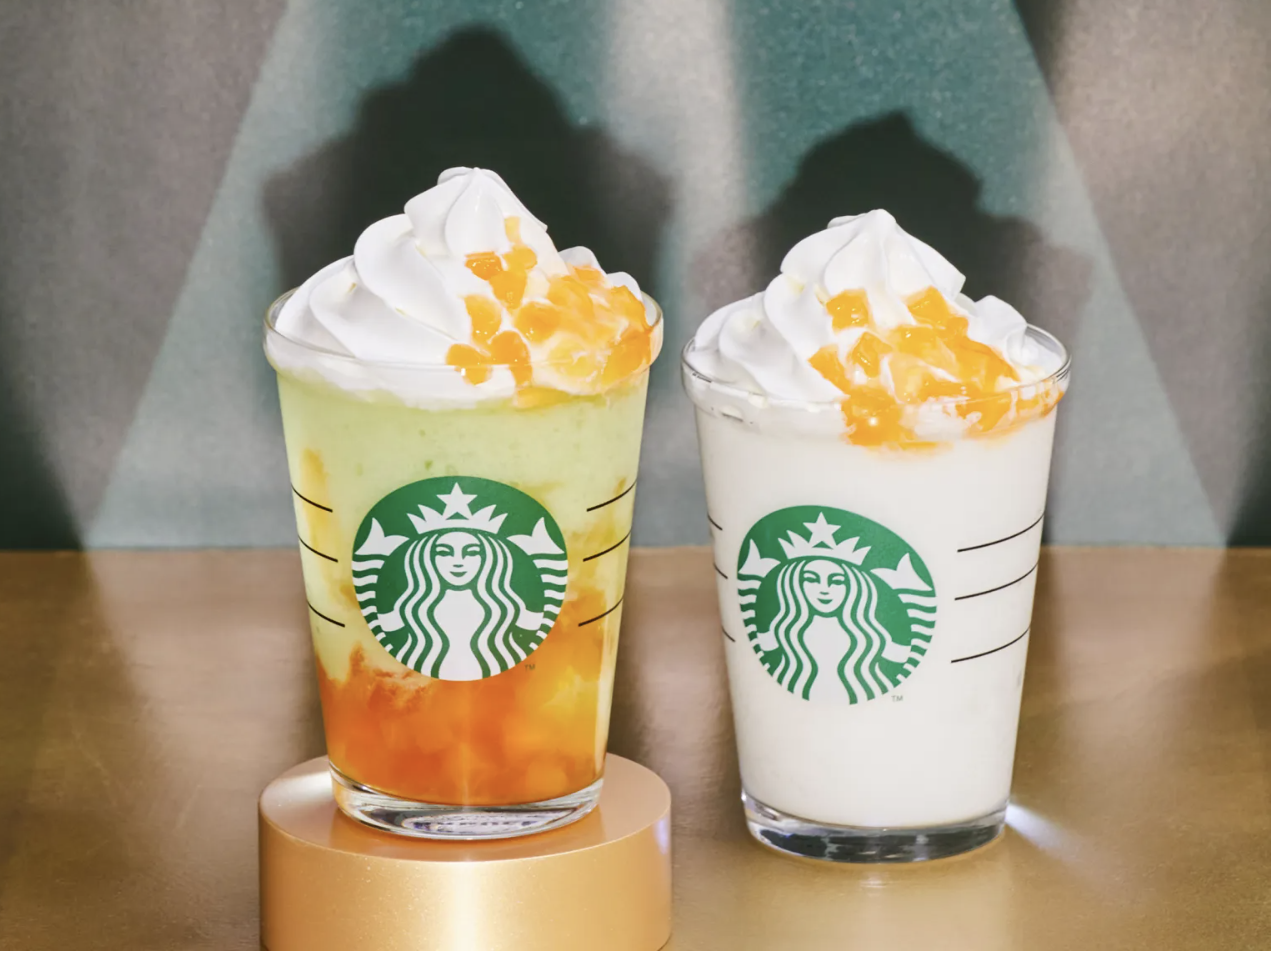 Starbucks Japan adds a Motto Frappuccino to menu for limited time